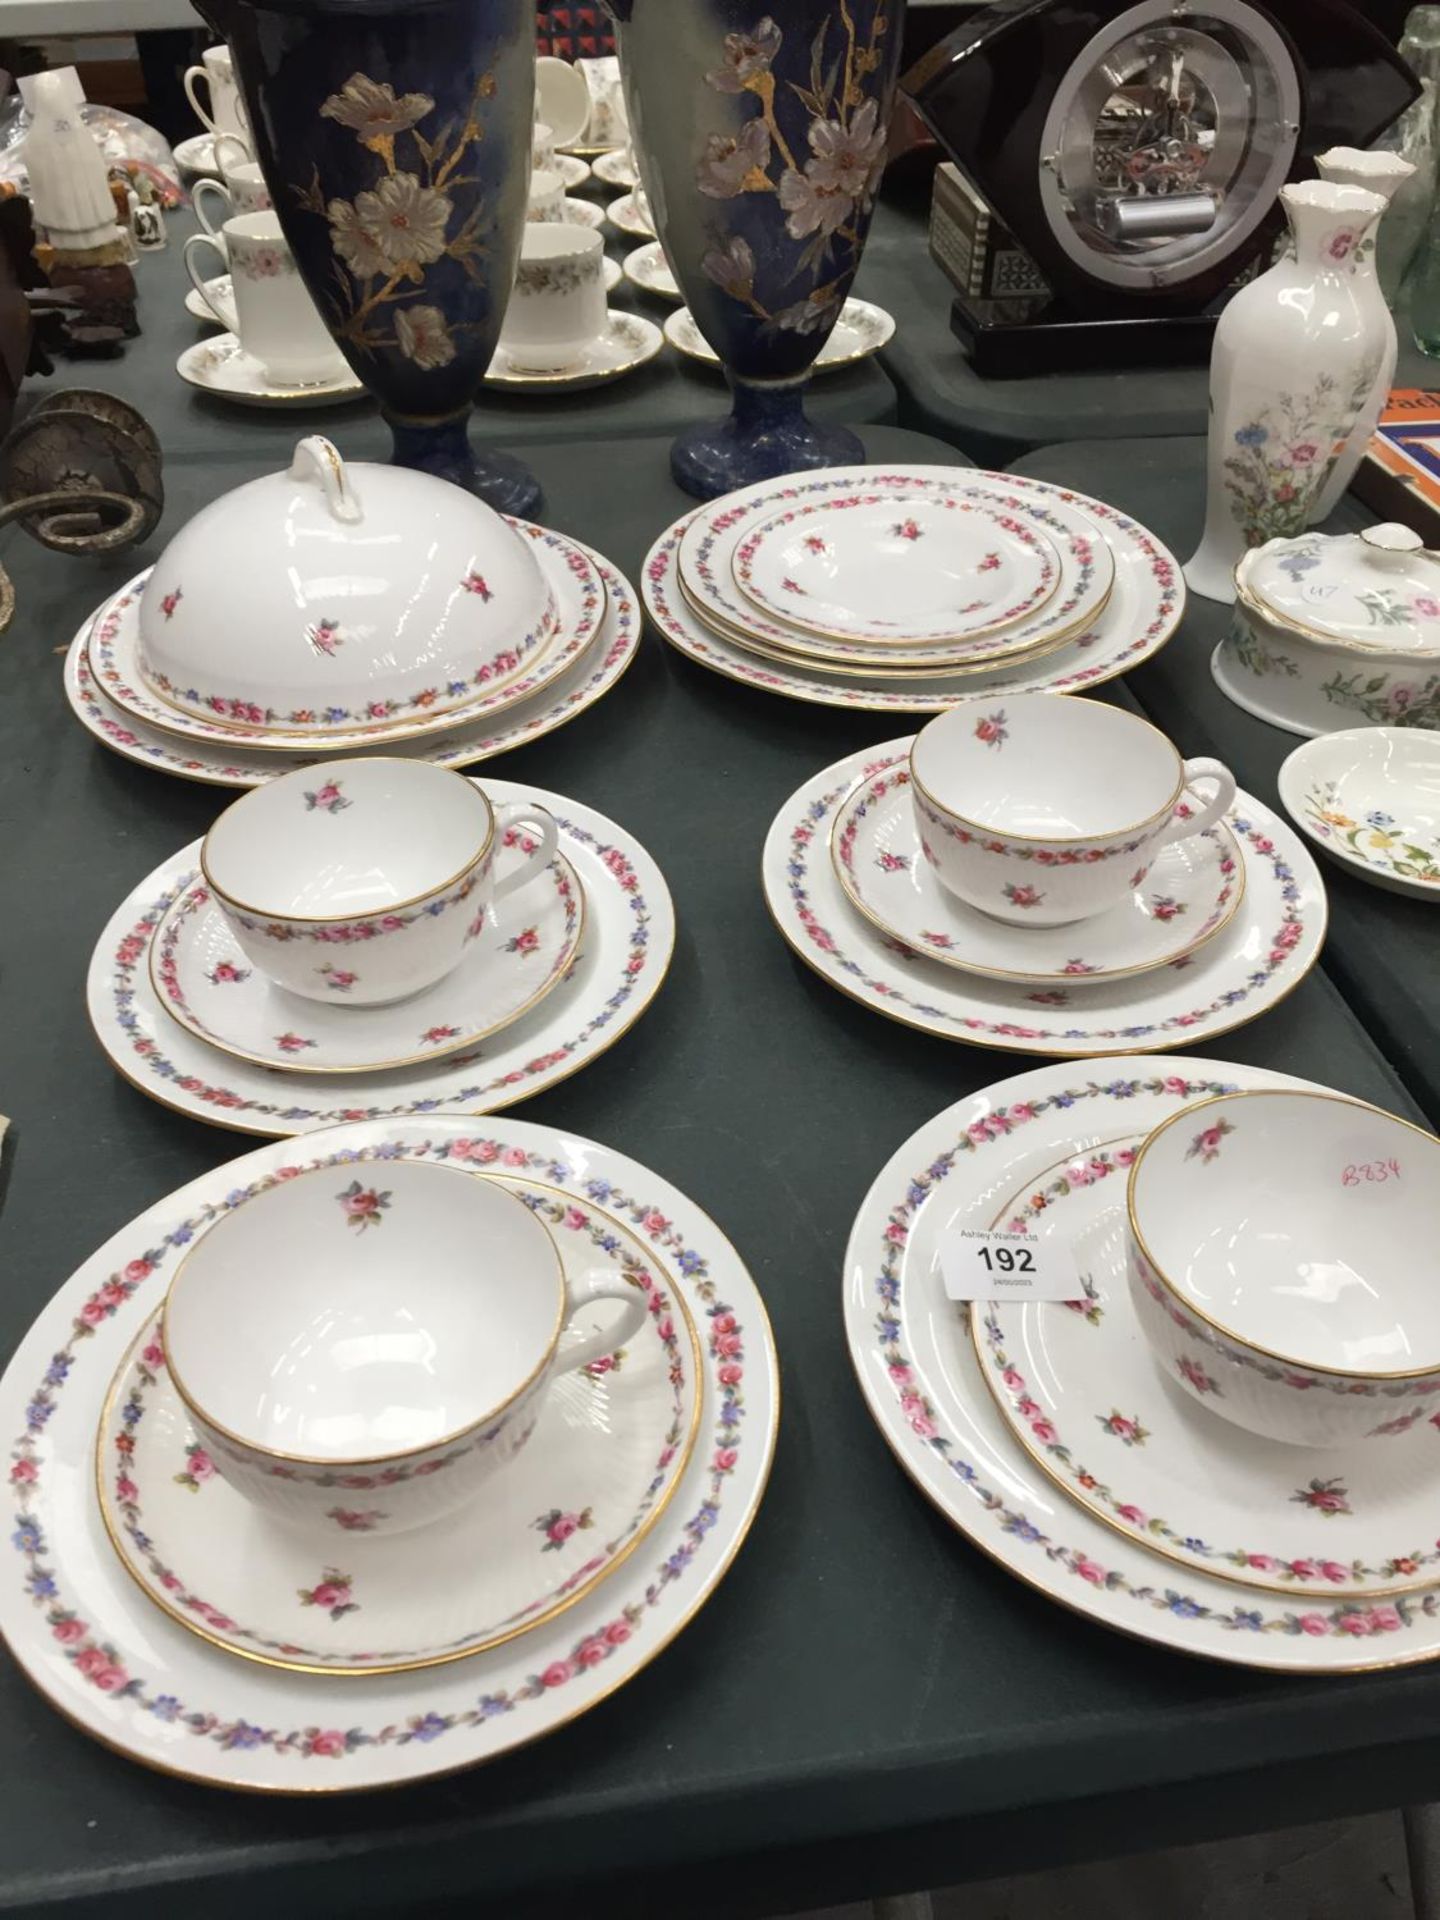 A QUANTITY OF 19TH CENTURY COPELAND SPODE CUPS, SAUCERS AND PLATES PLUS A MUFFIN DISH WITH CABBAGE - Image 2 of 4